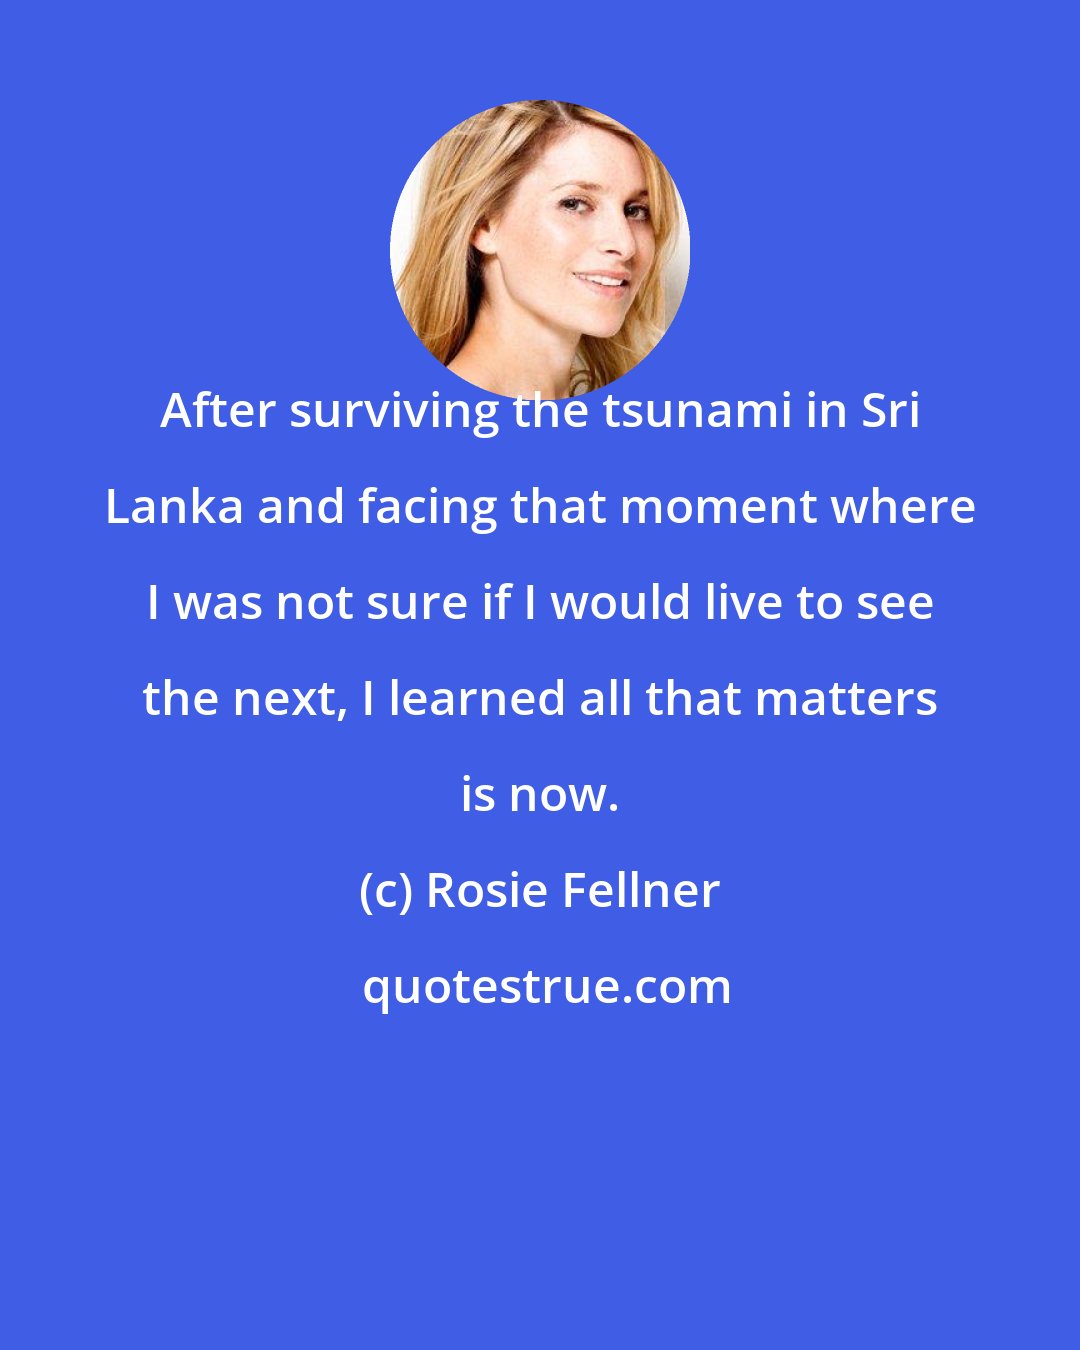 Rosie Fellner: After surviving the tsunami in Sri Lanka and facing that moment where I was not sure if I would live to see the next, I learned all that matters is now.